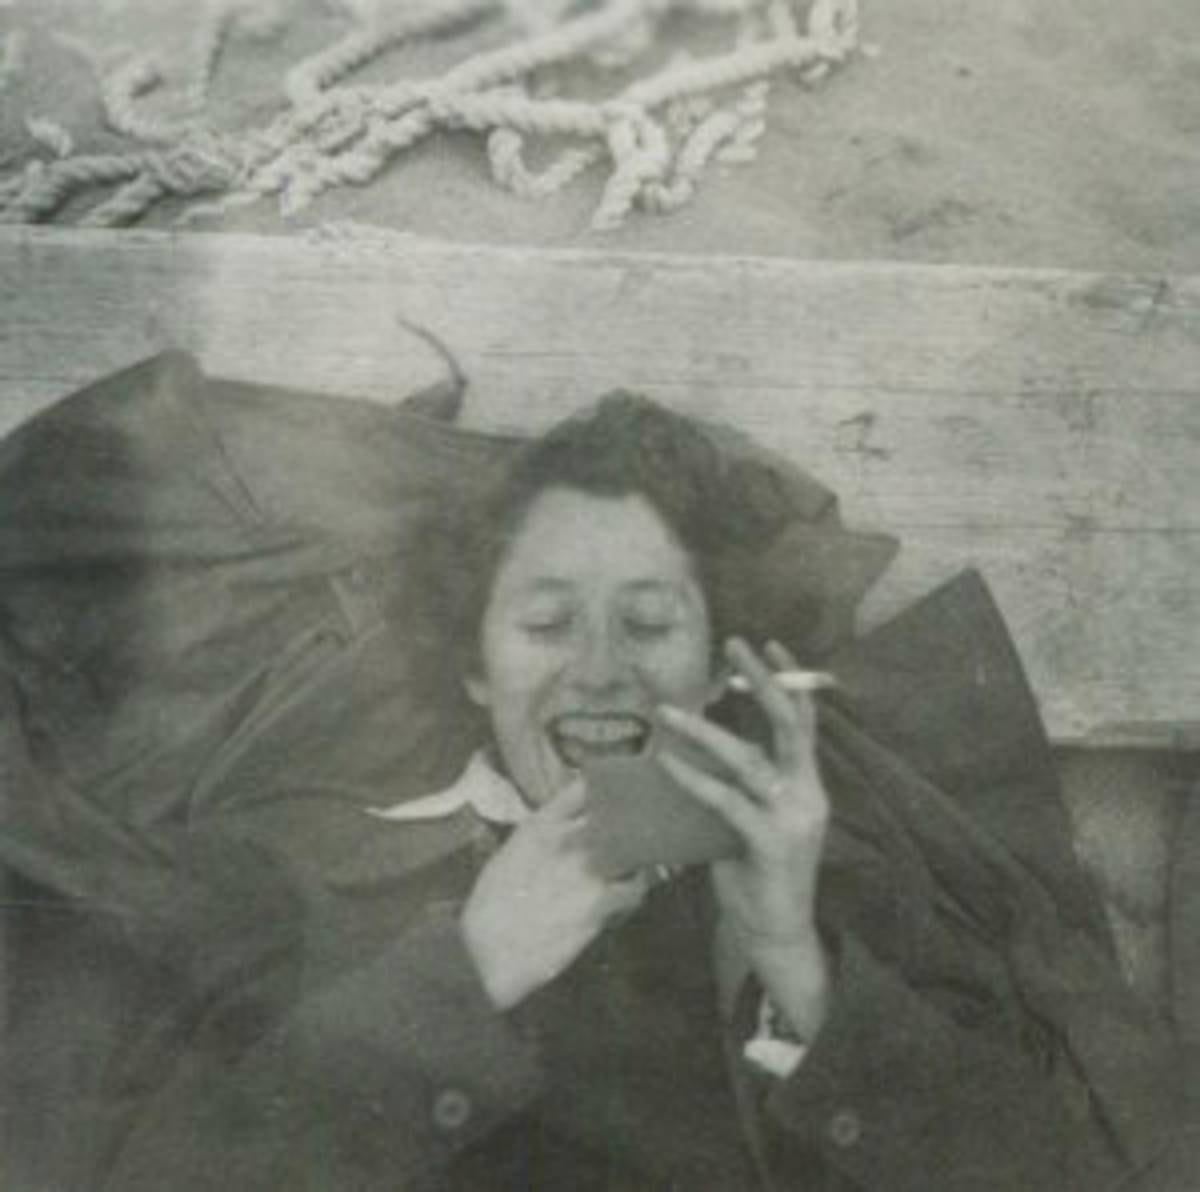 The author’s mother fixing her lipstick and smoking a cigarette on Nahariya beach, 1949.